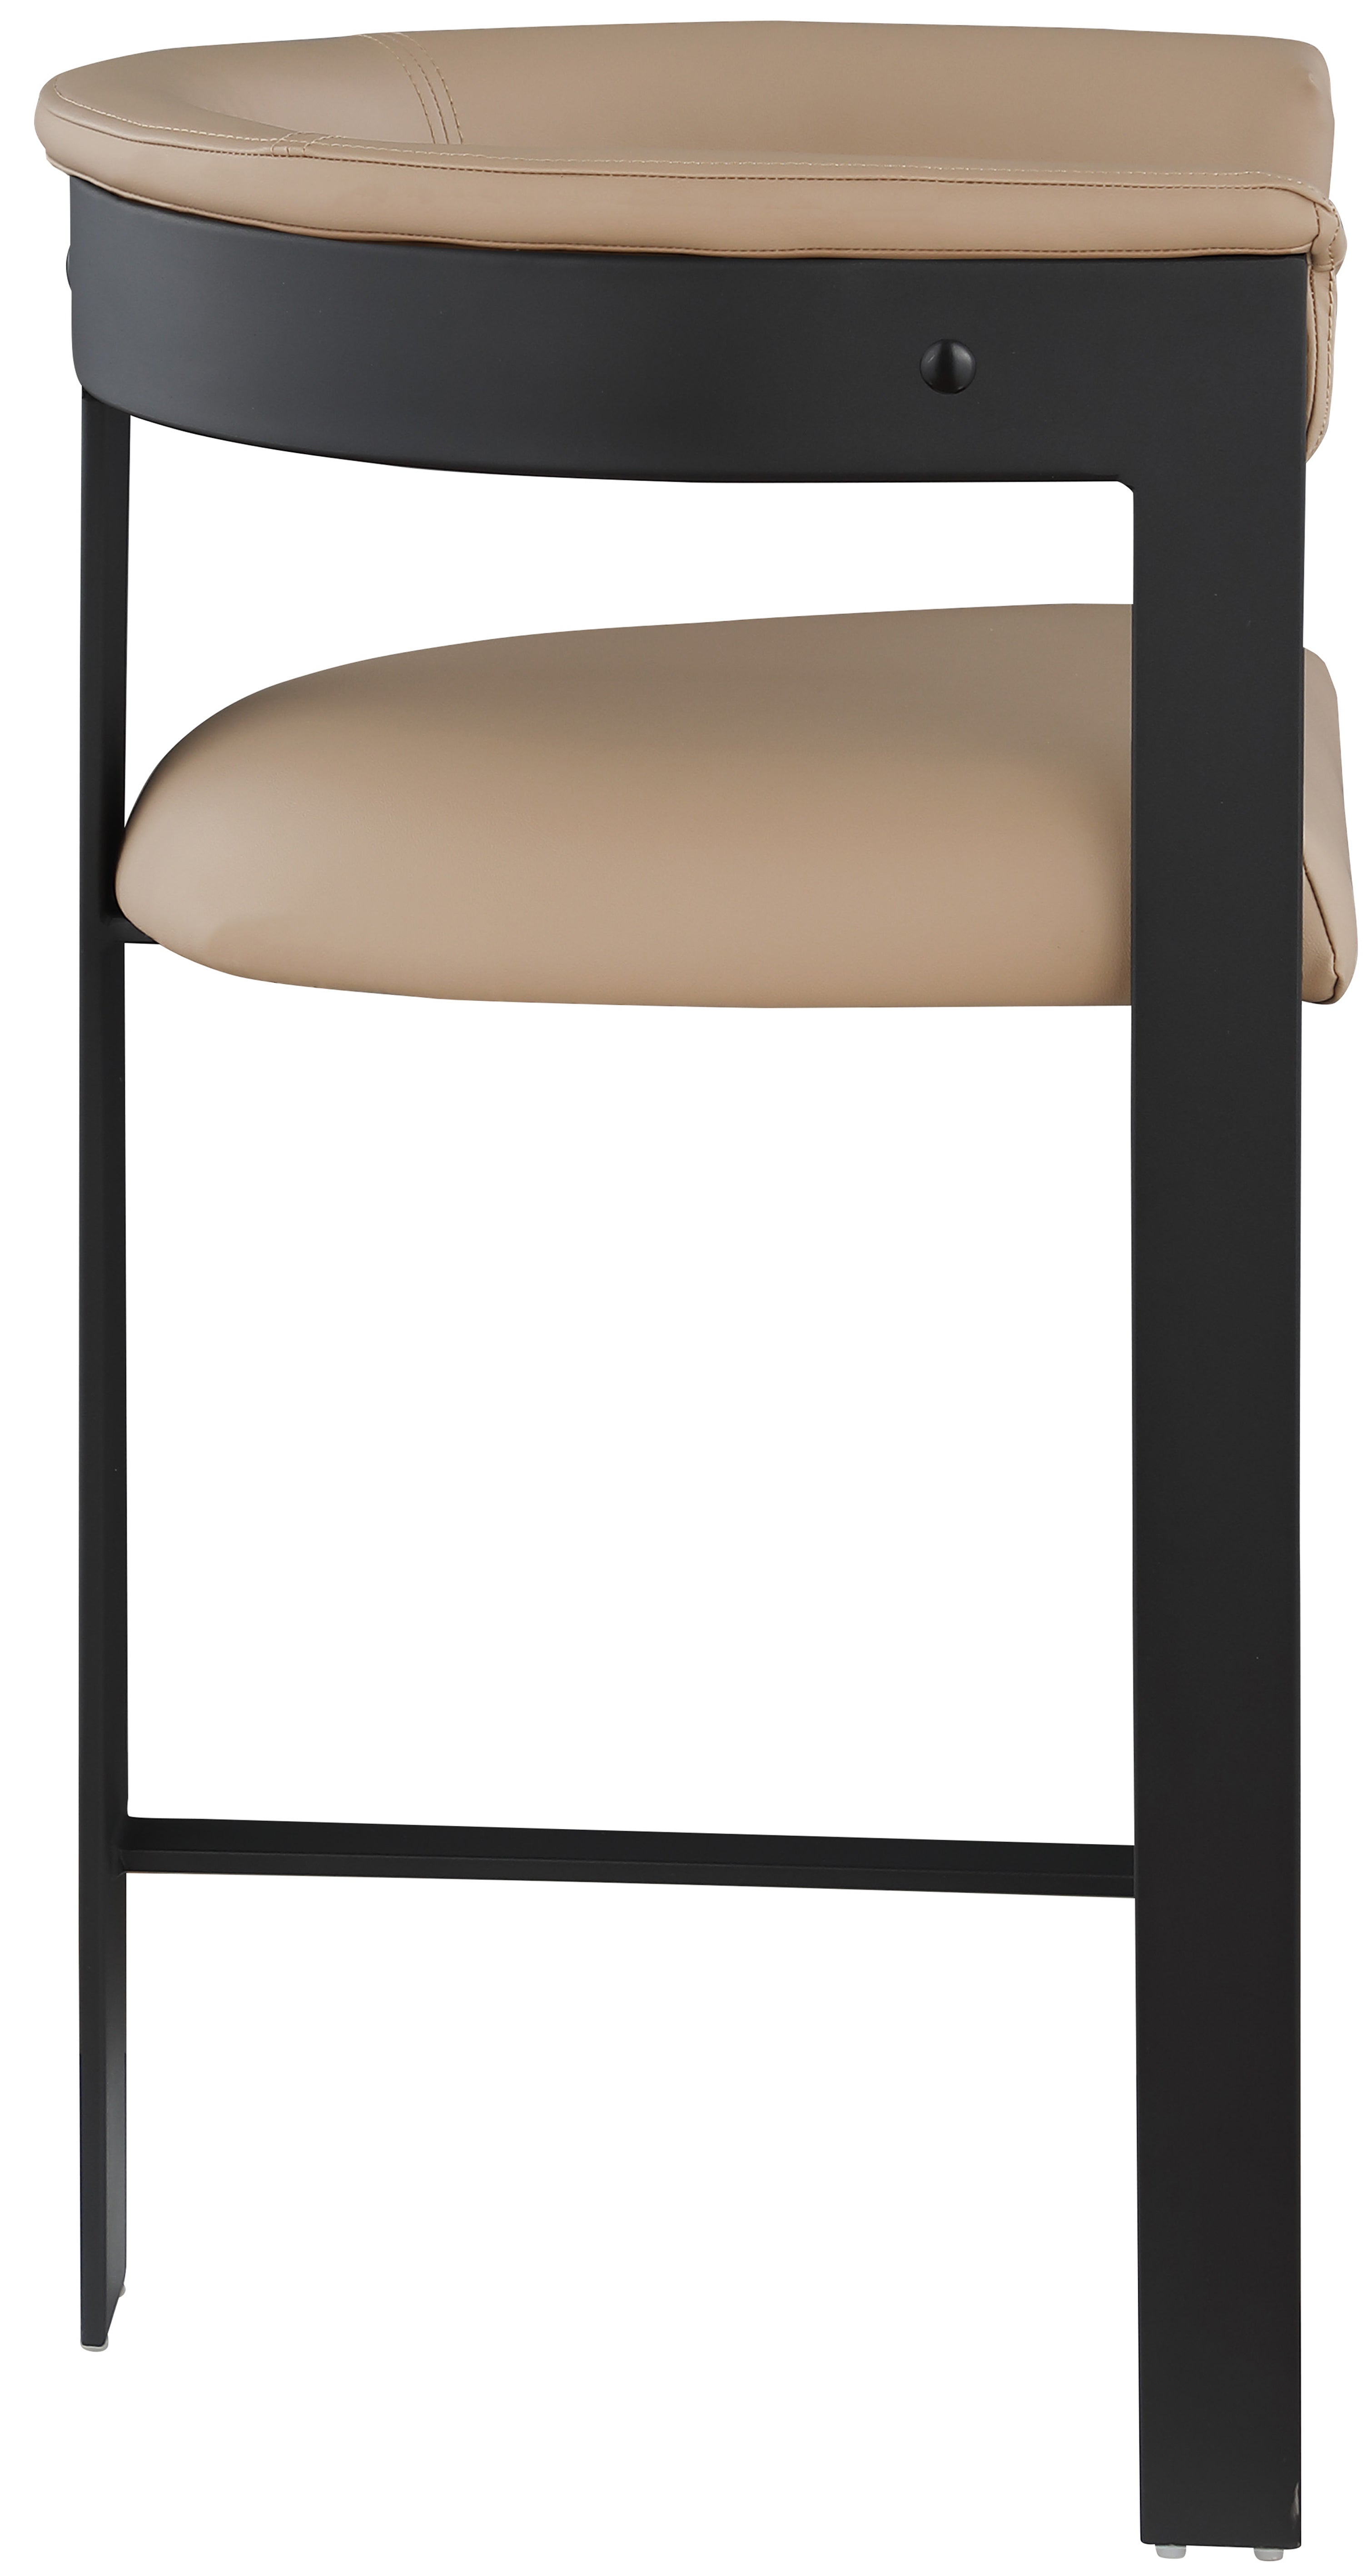 Romeo Faux Leather Bar / Counter Stools